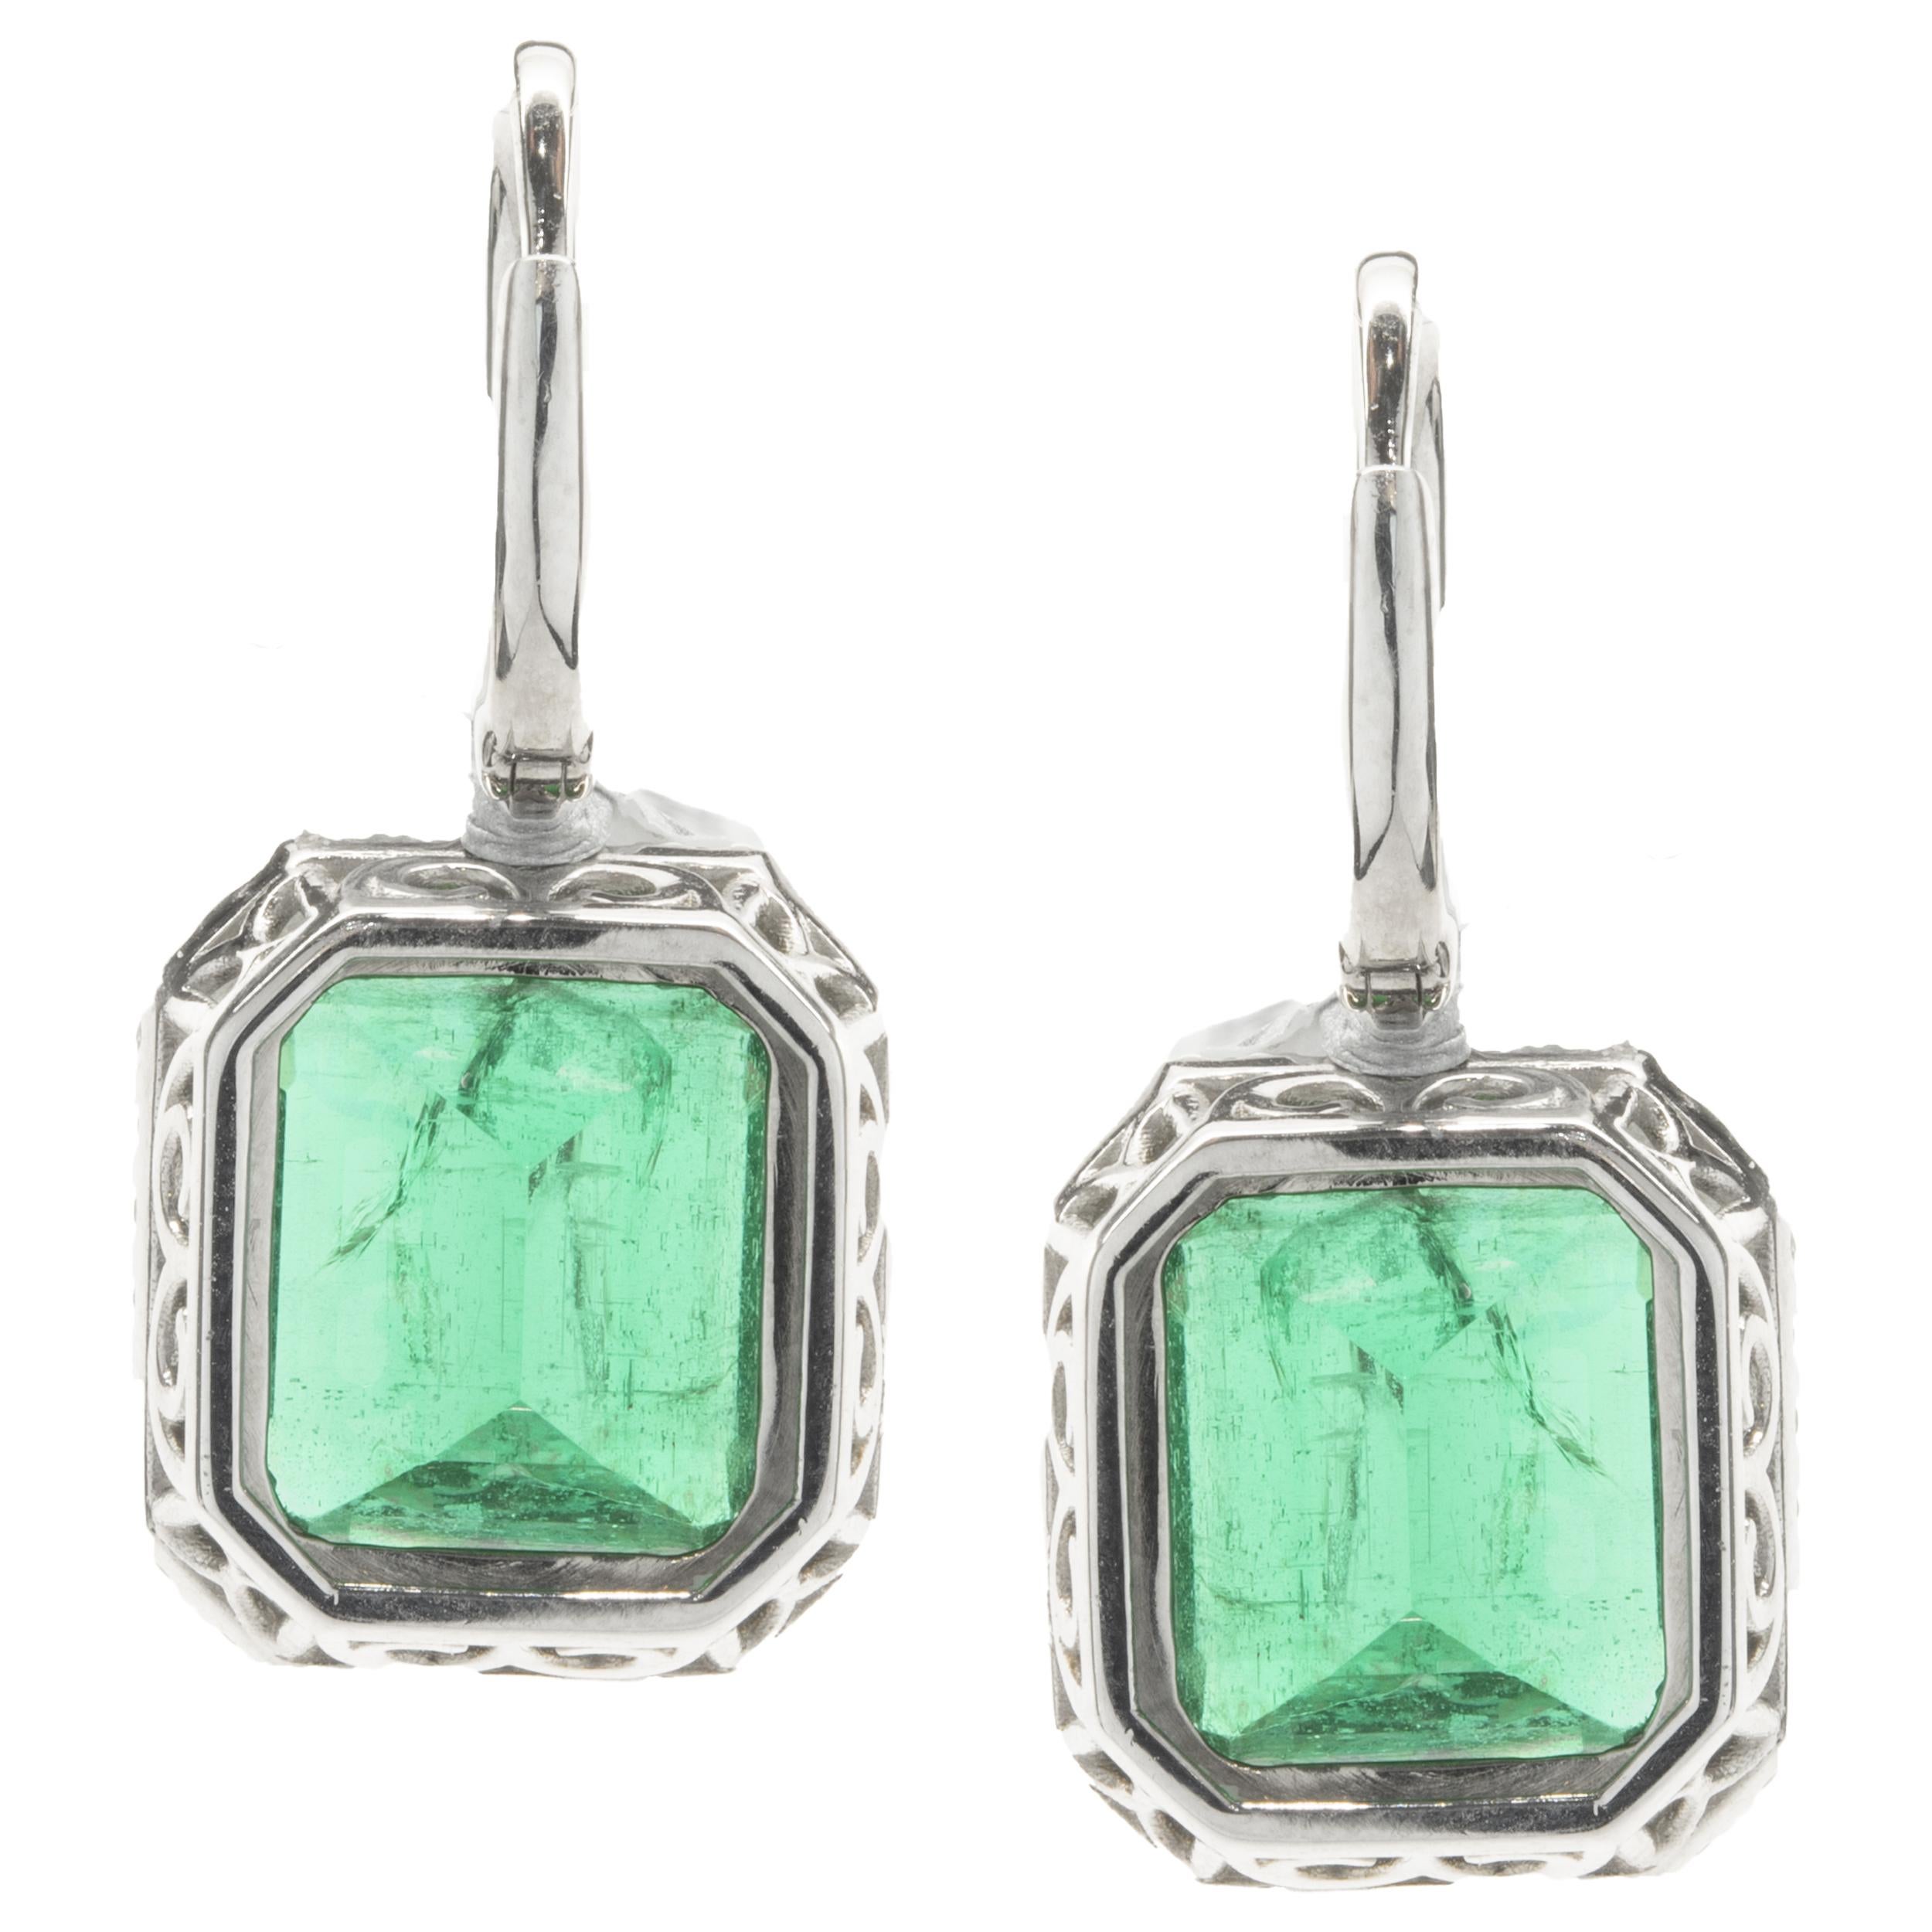 Designer: custom
Material: 14K white gold
Diamond: 72 round brilliant cut = 0.95cttw
Color: F
Clarity: VS1-2
Emerald: 2 emerald cut = 13.92cttw
Dimensions: earrings measure 27mm in length 
Fastenings: snap backs
Weight: 8.81 grams